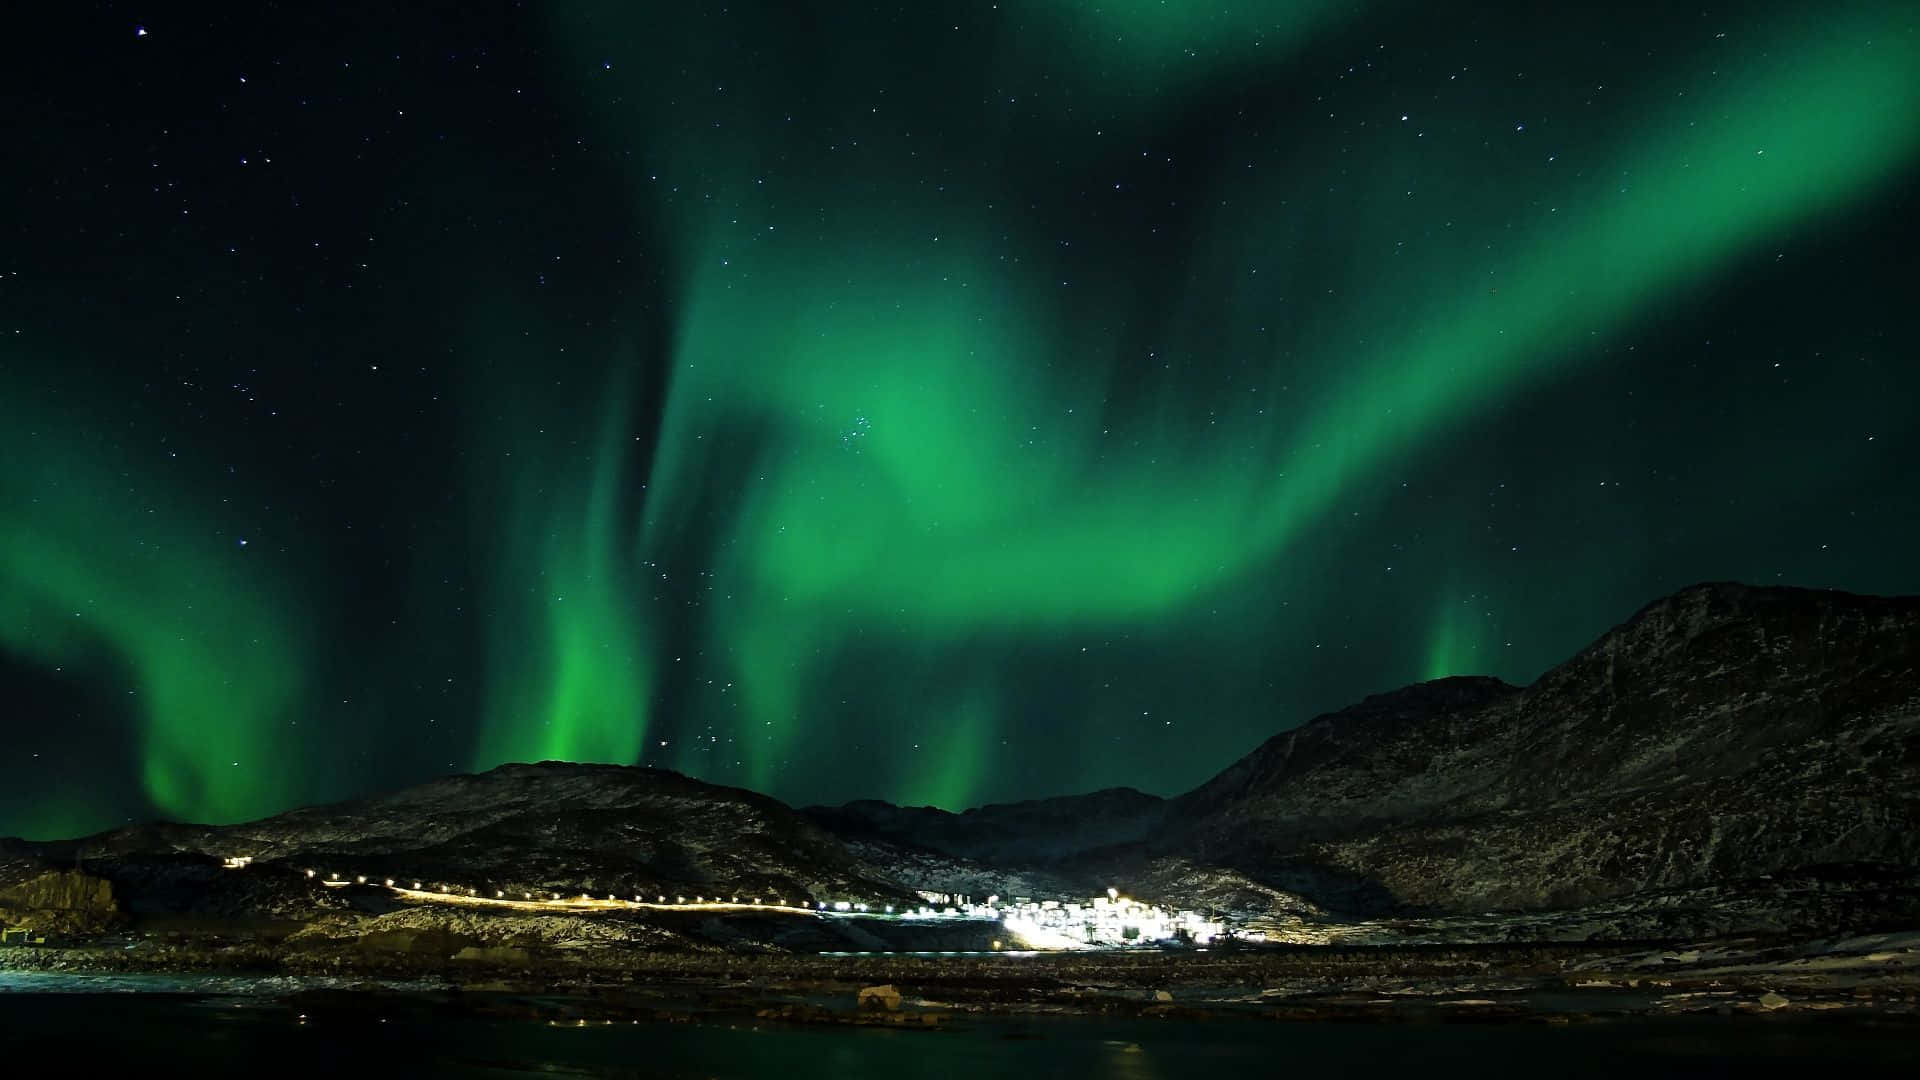 “Aurora dazzles with its stunning sky of color"